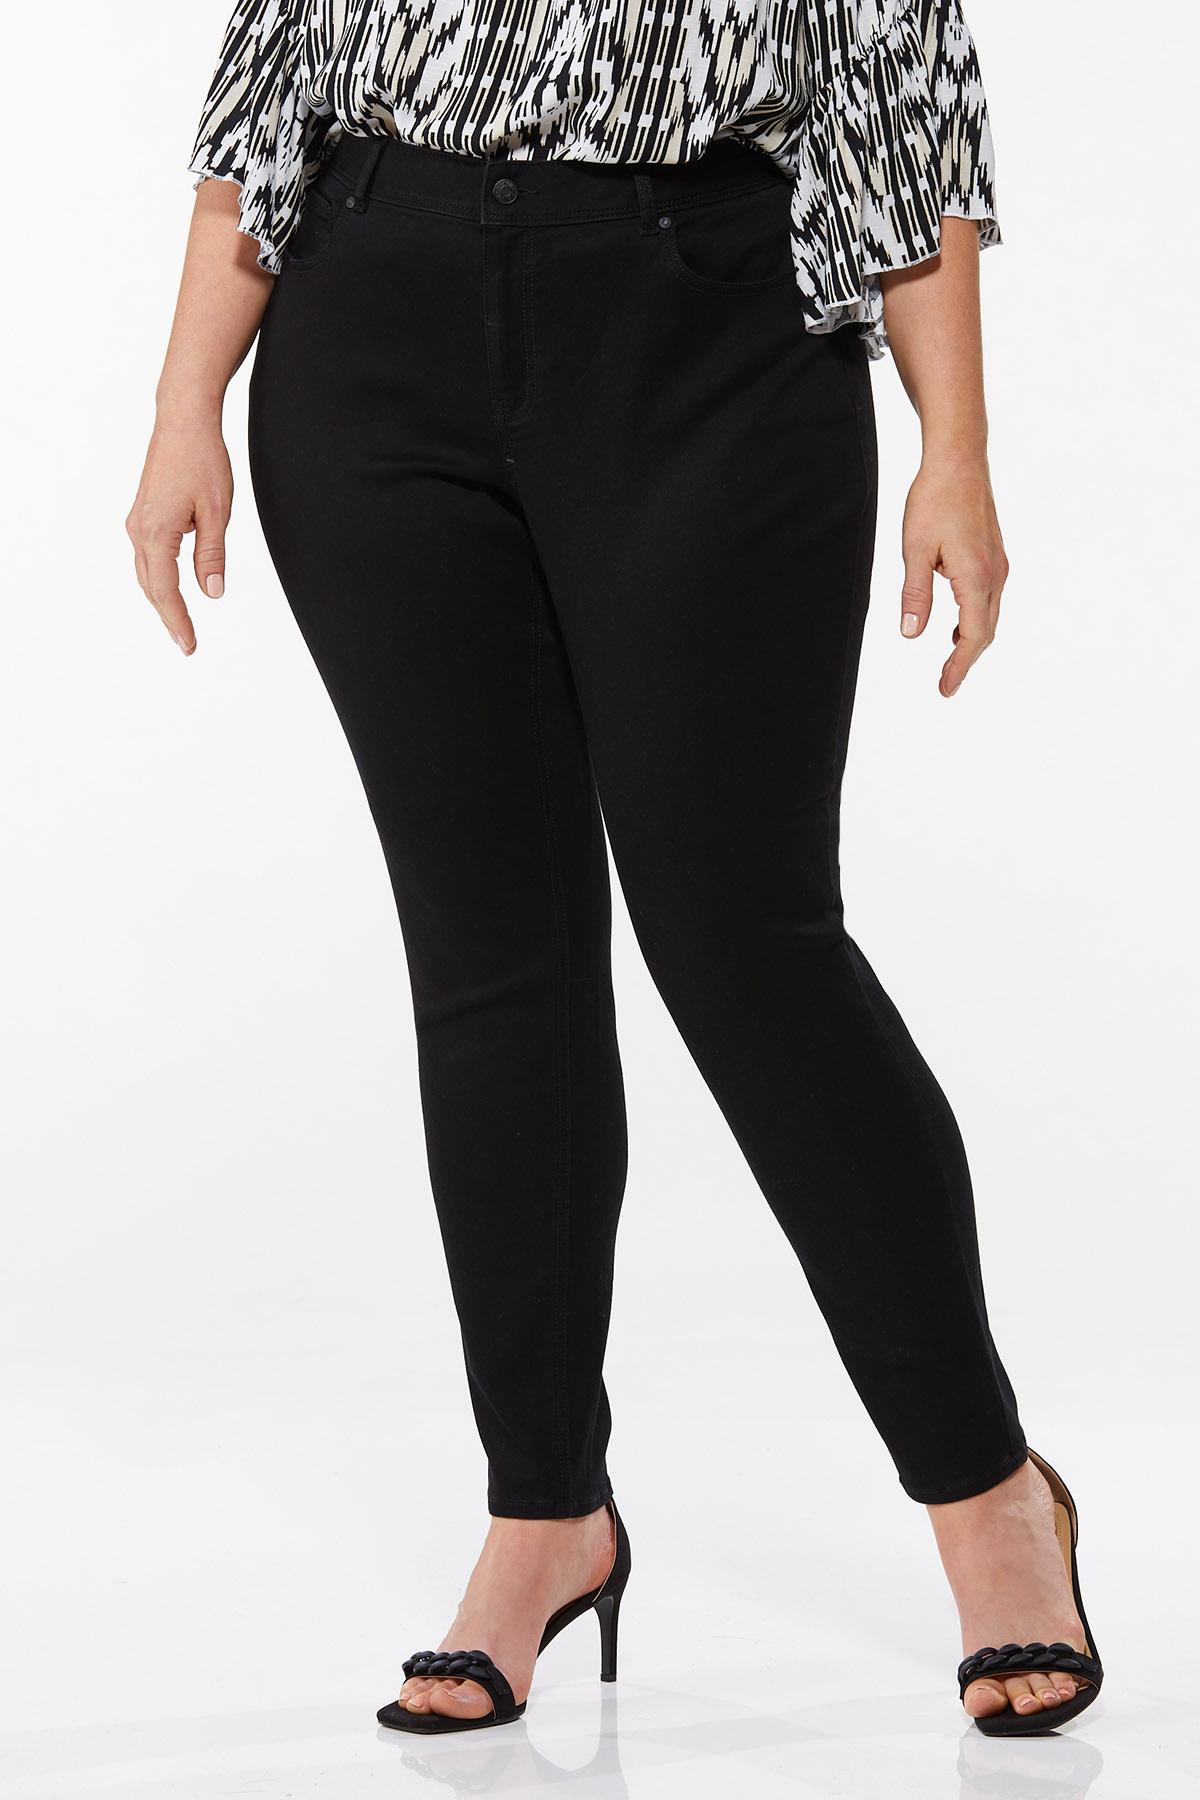 Plus Black High Waisted Jeggings, Plus Size